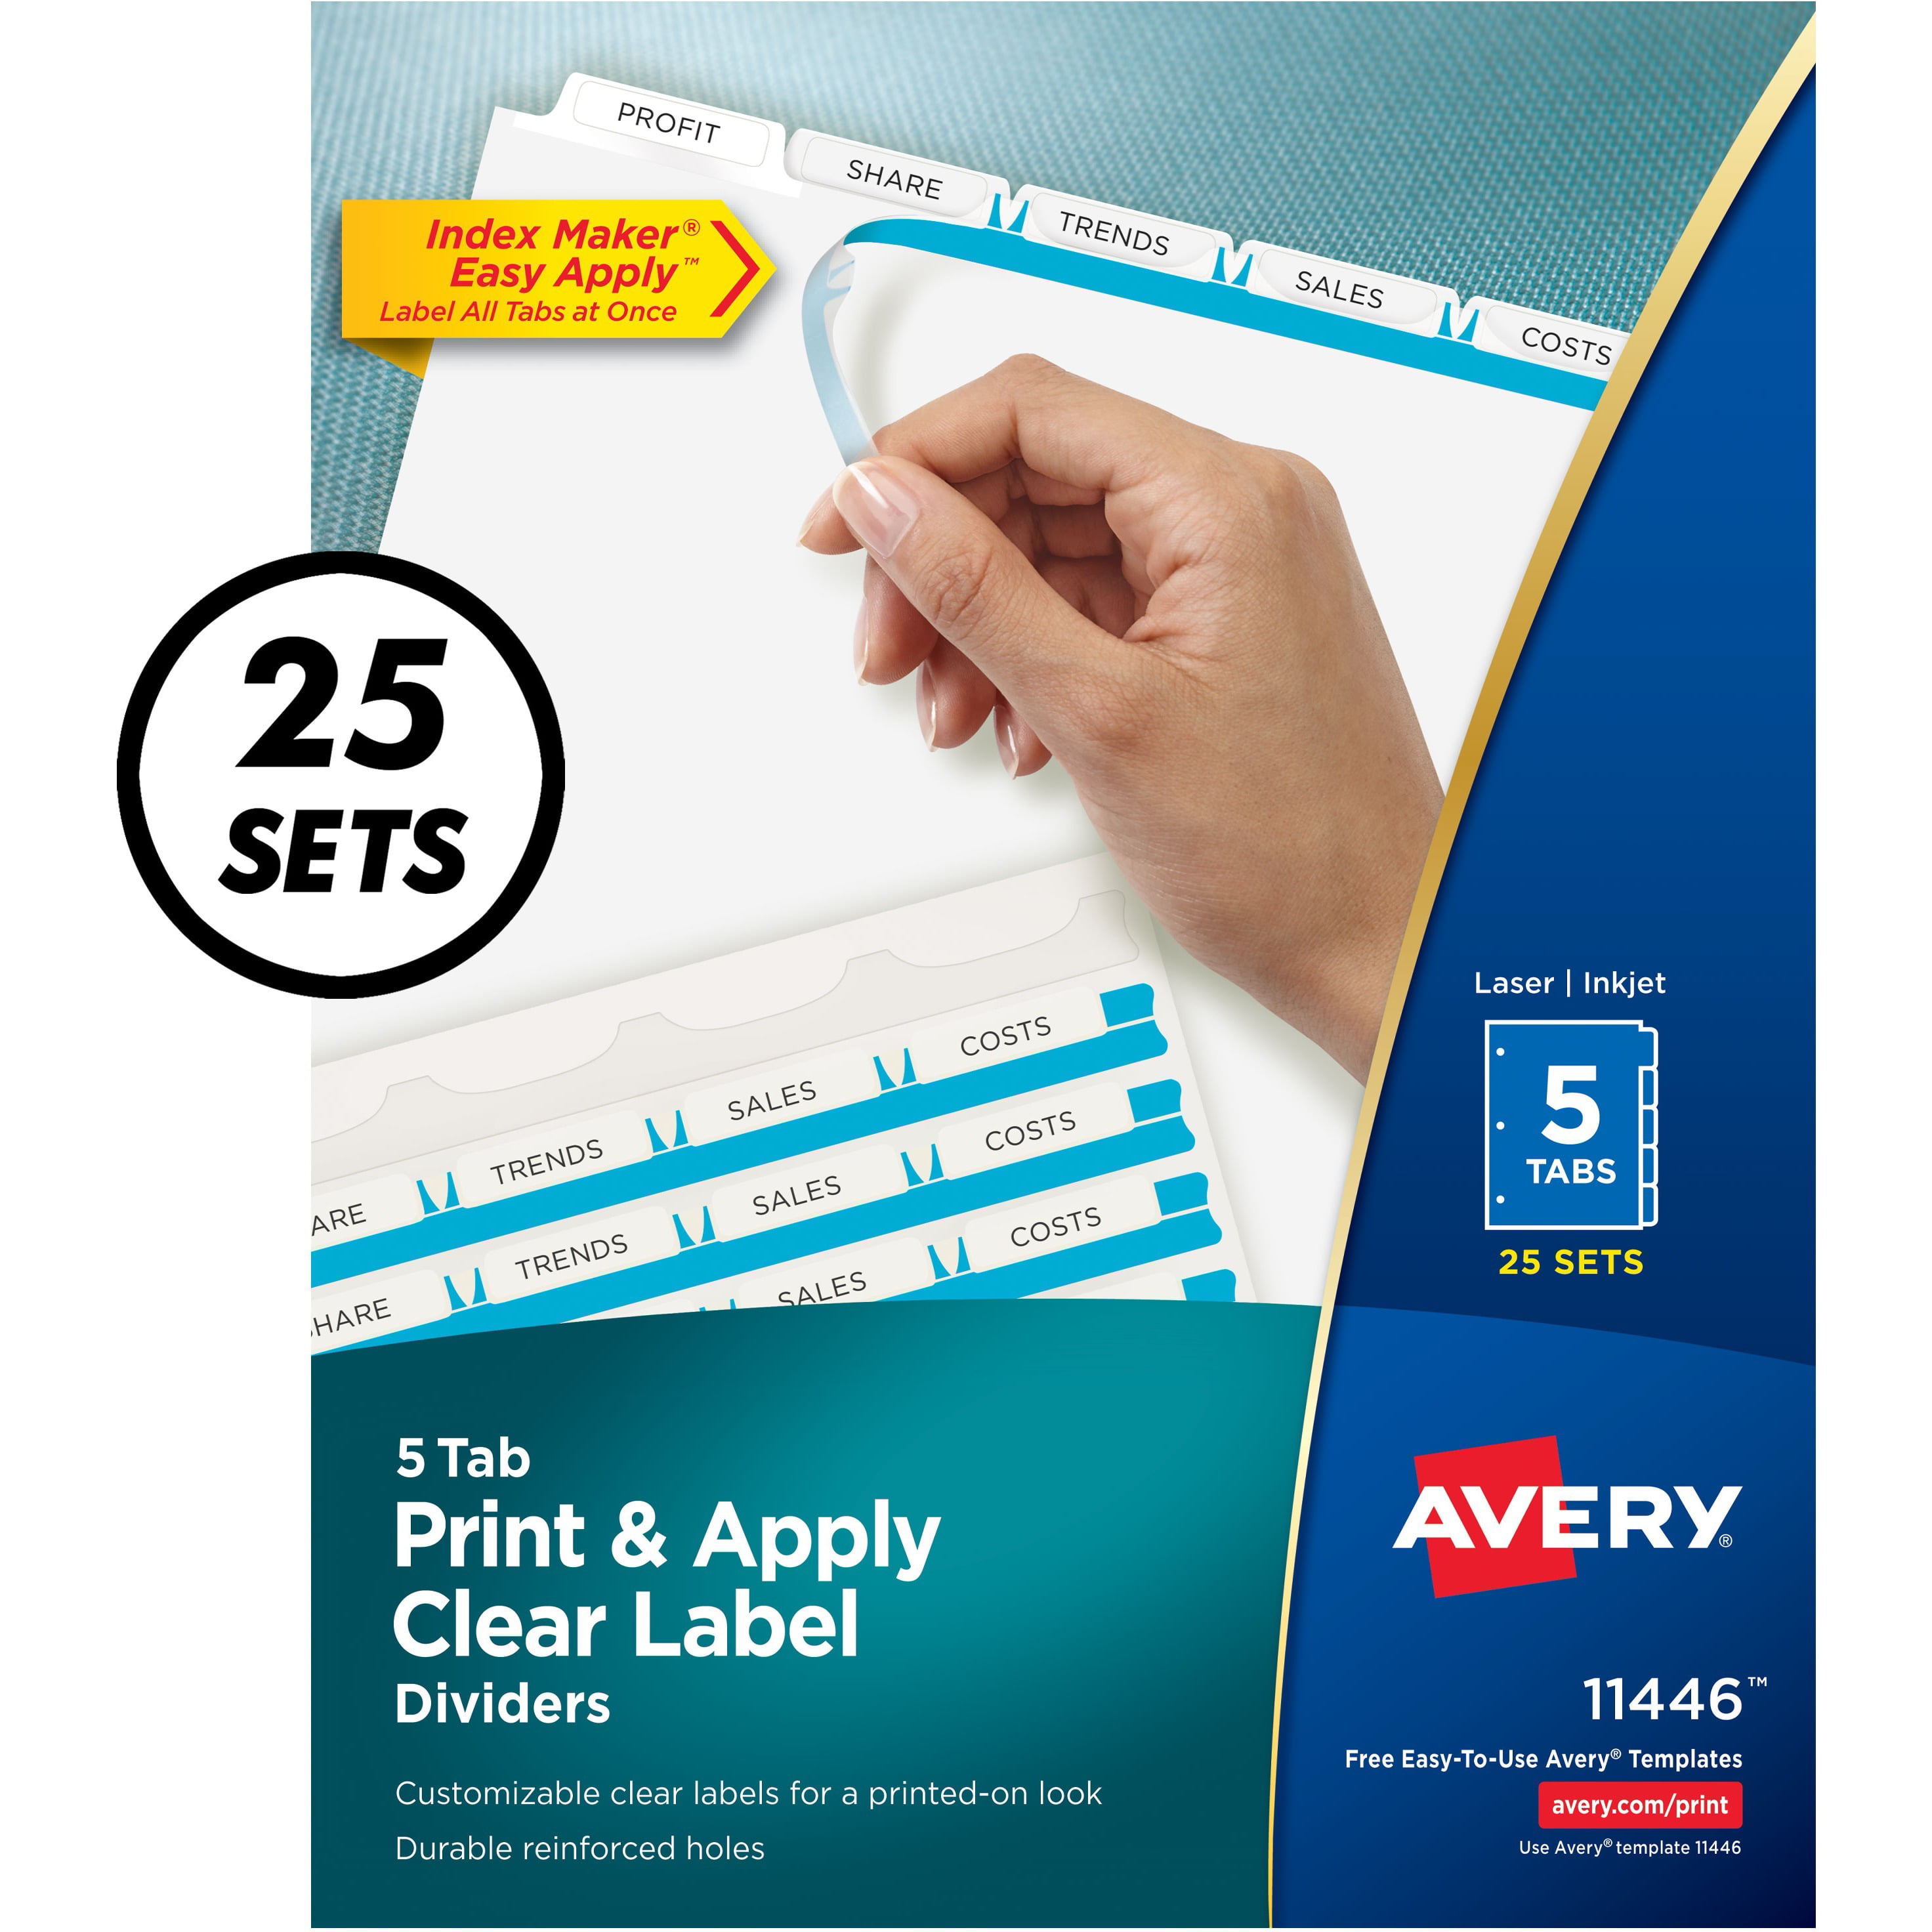 avery-5-tab-print-apply-clear-label-dividers-25-sets-11446